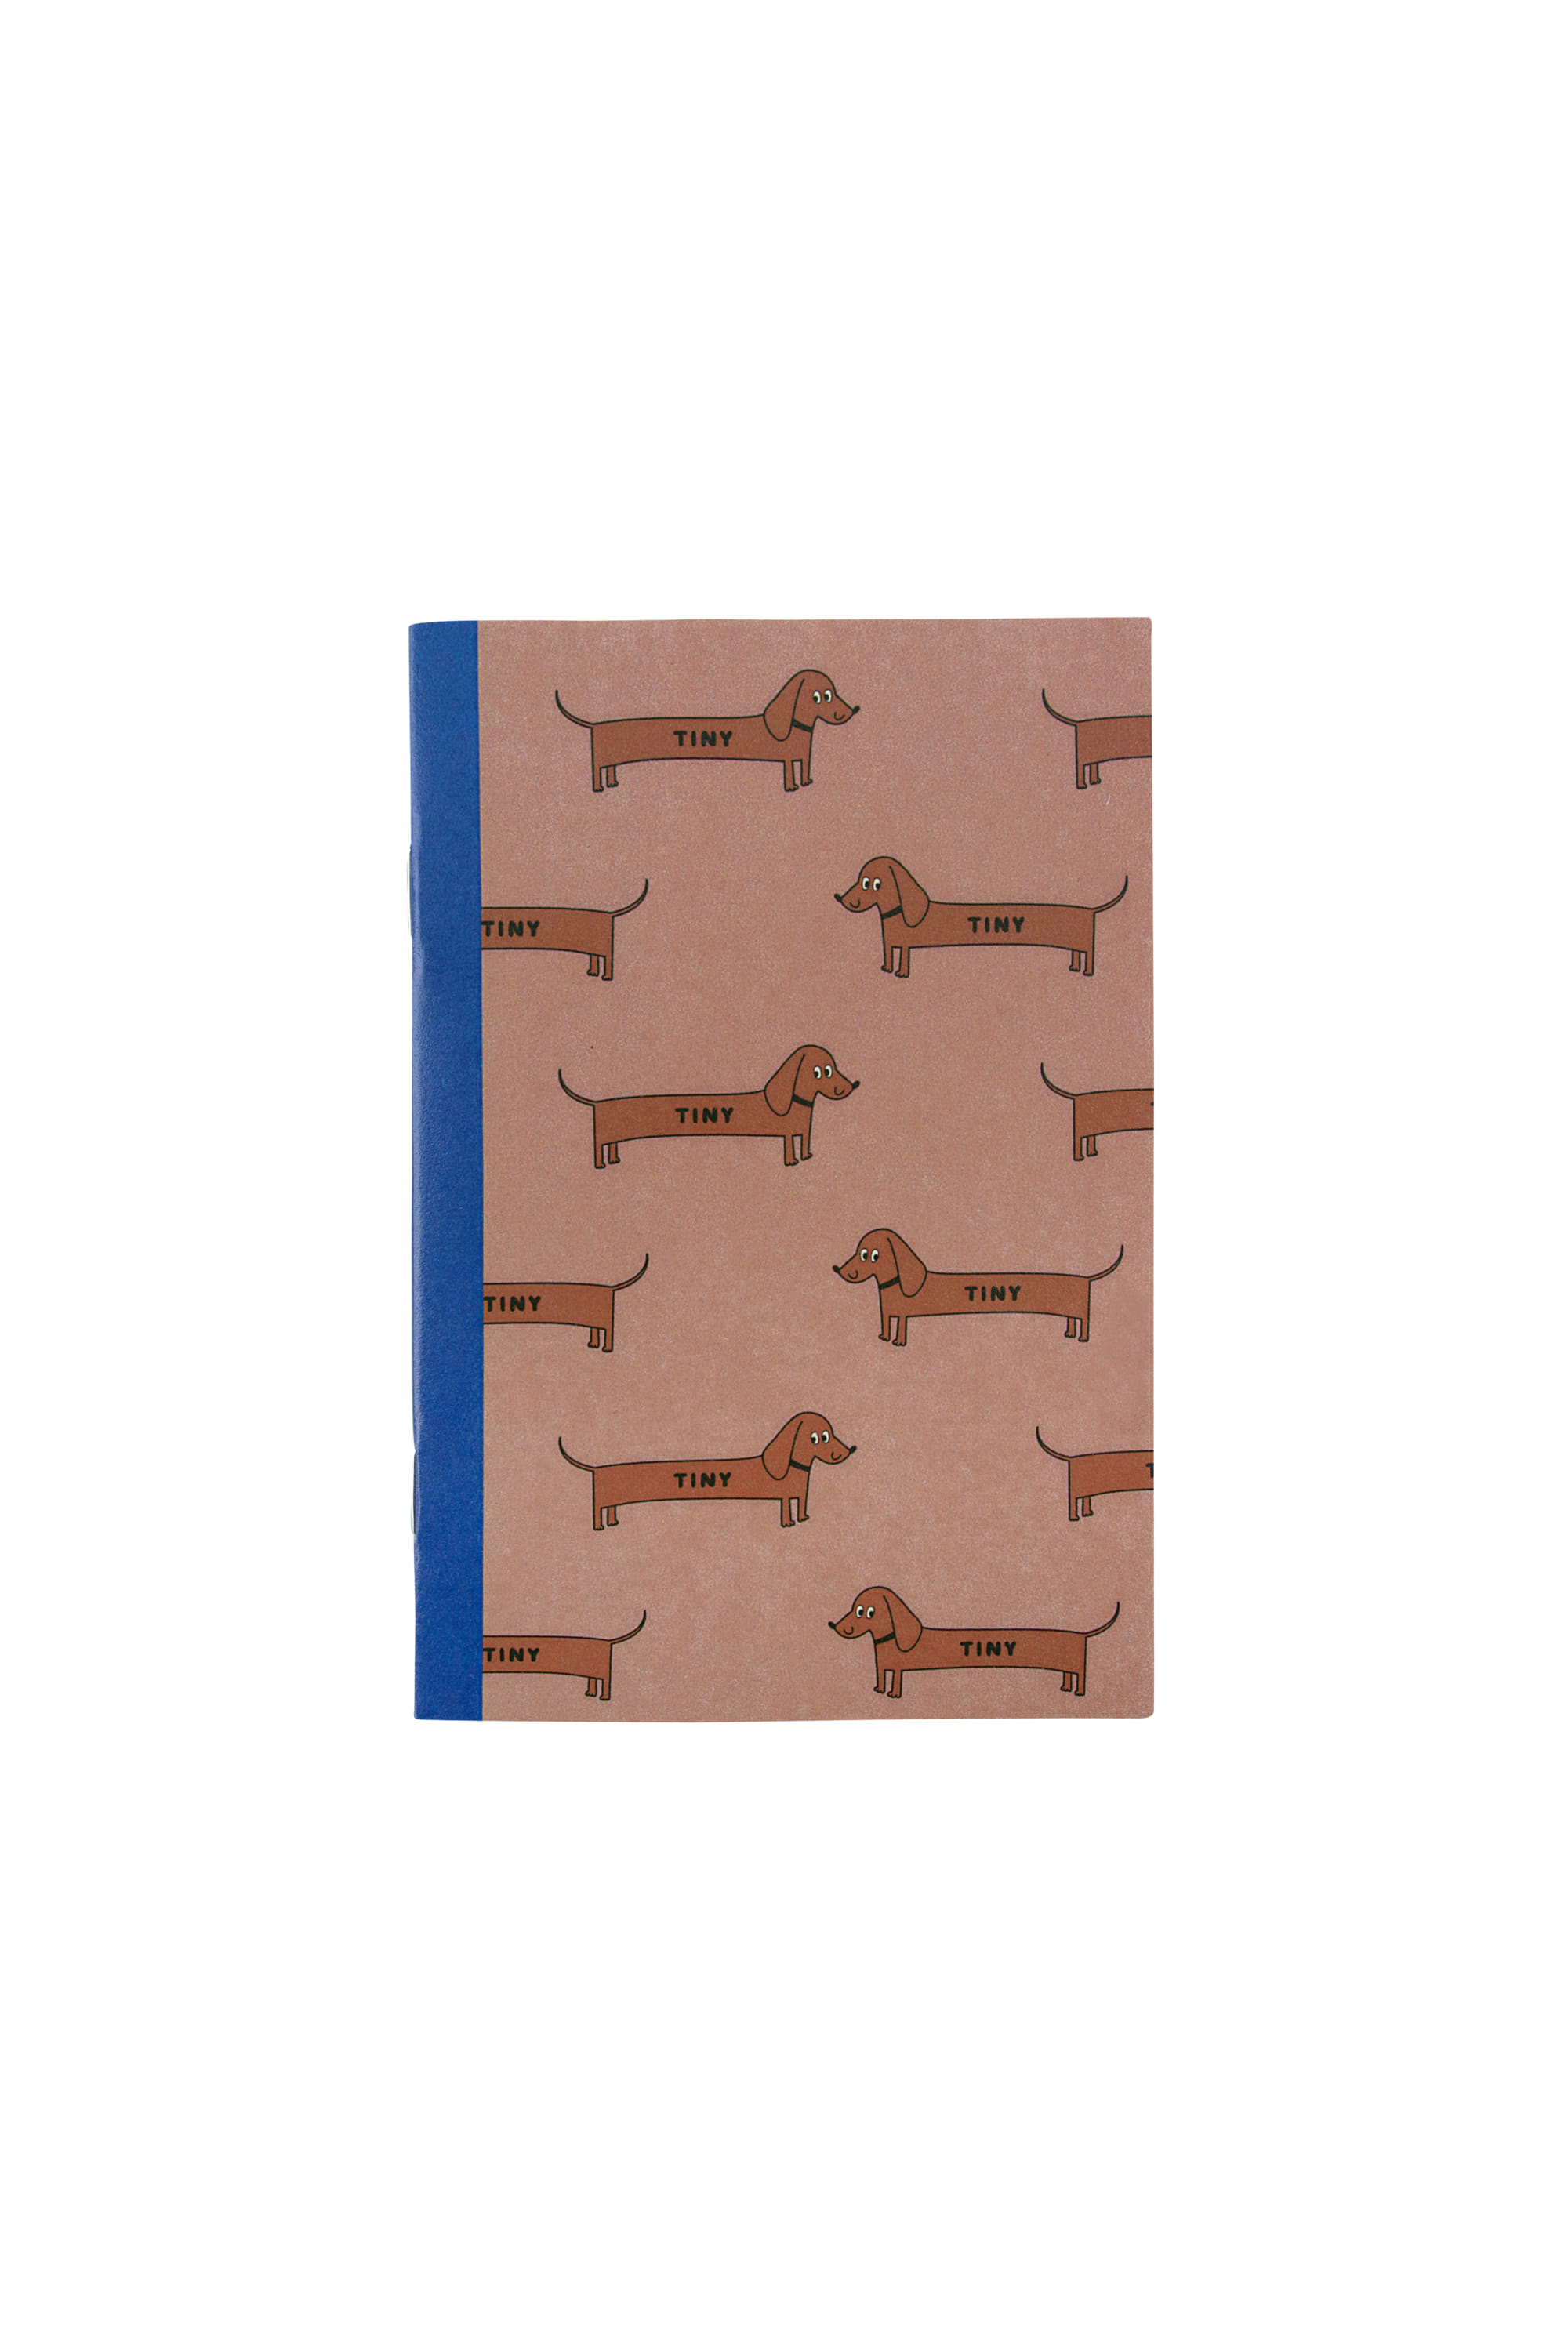 [Tiny Cottons]DOLCE FAR NIENTE notebook _ multicolor